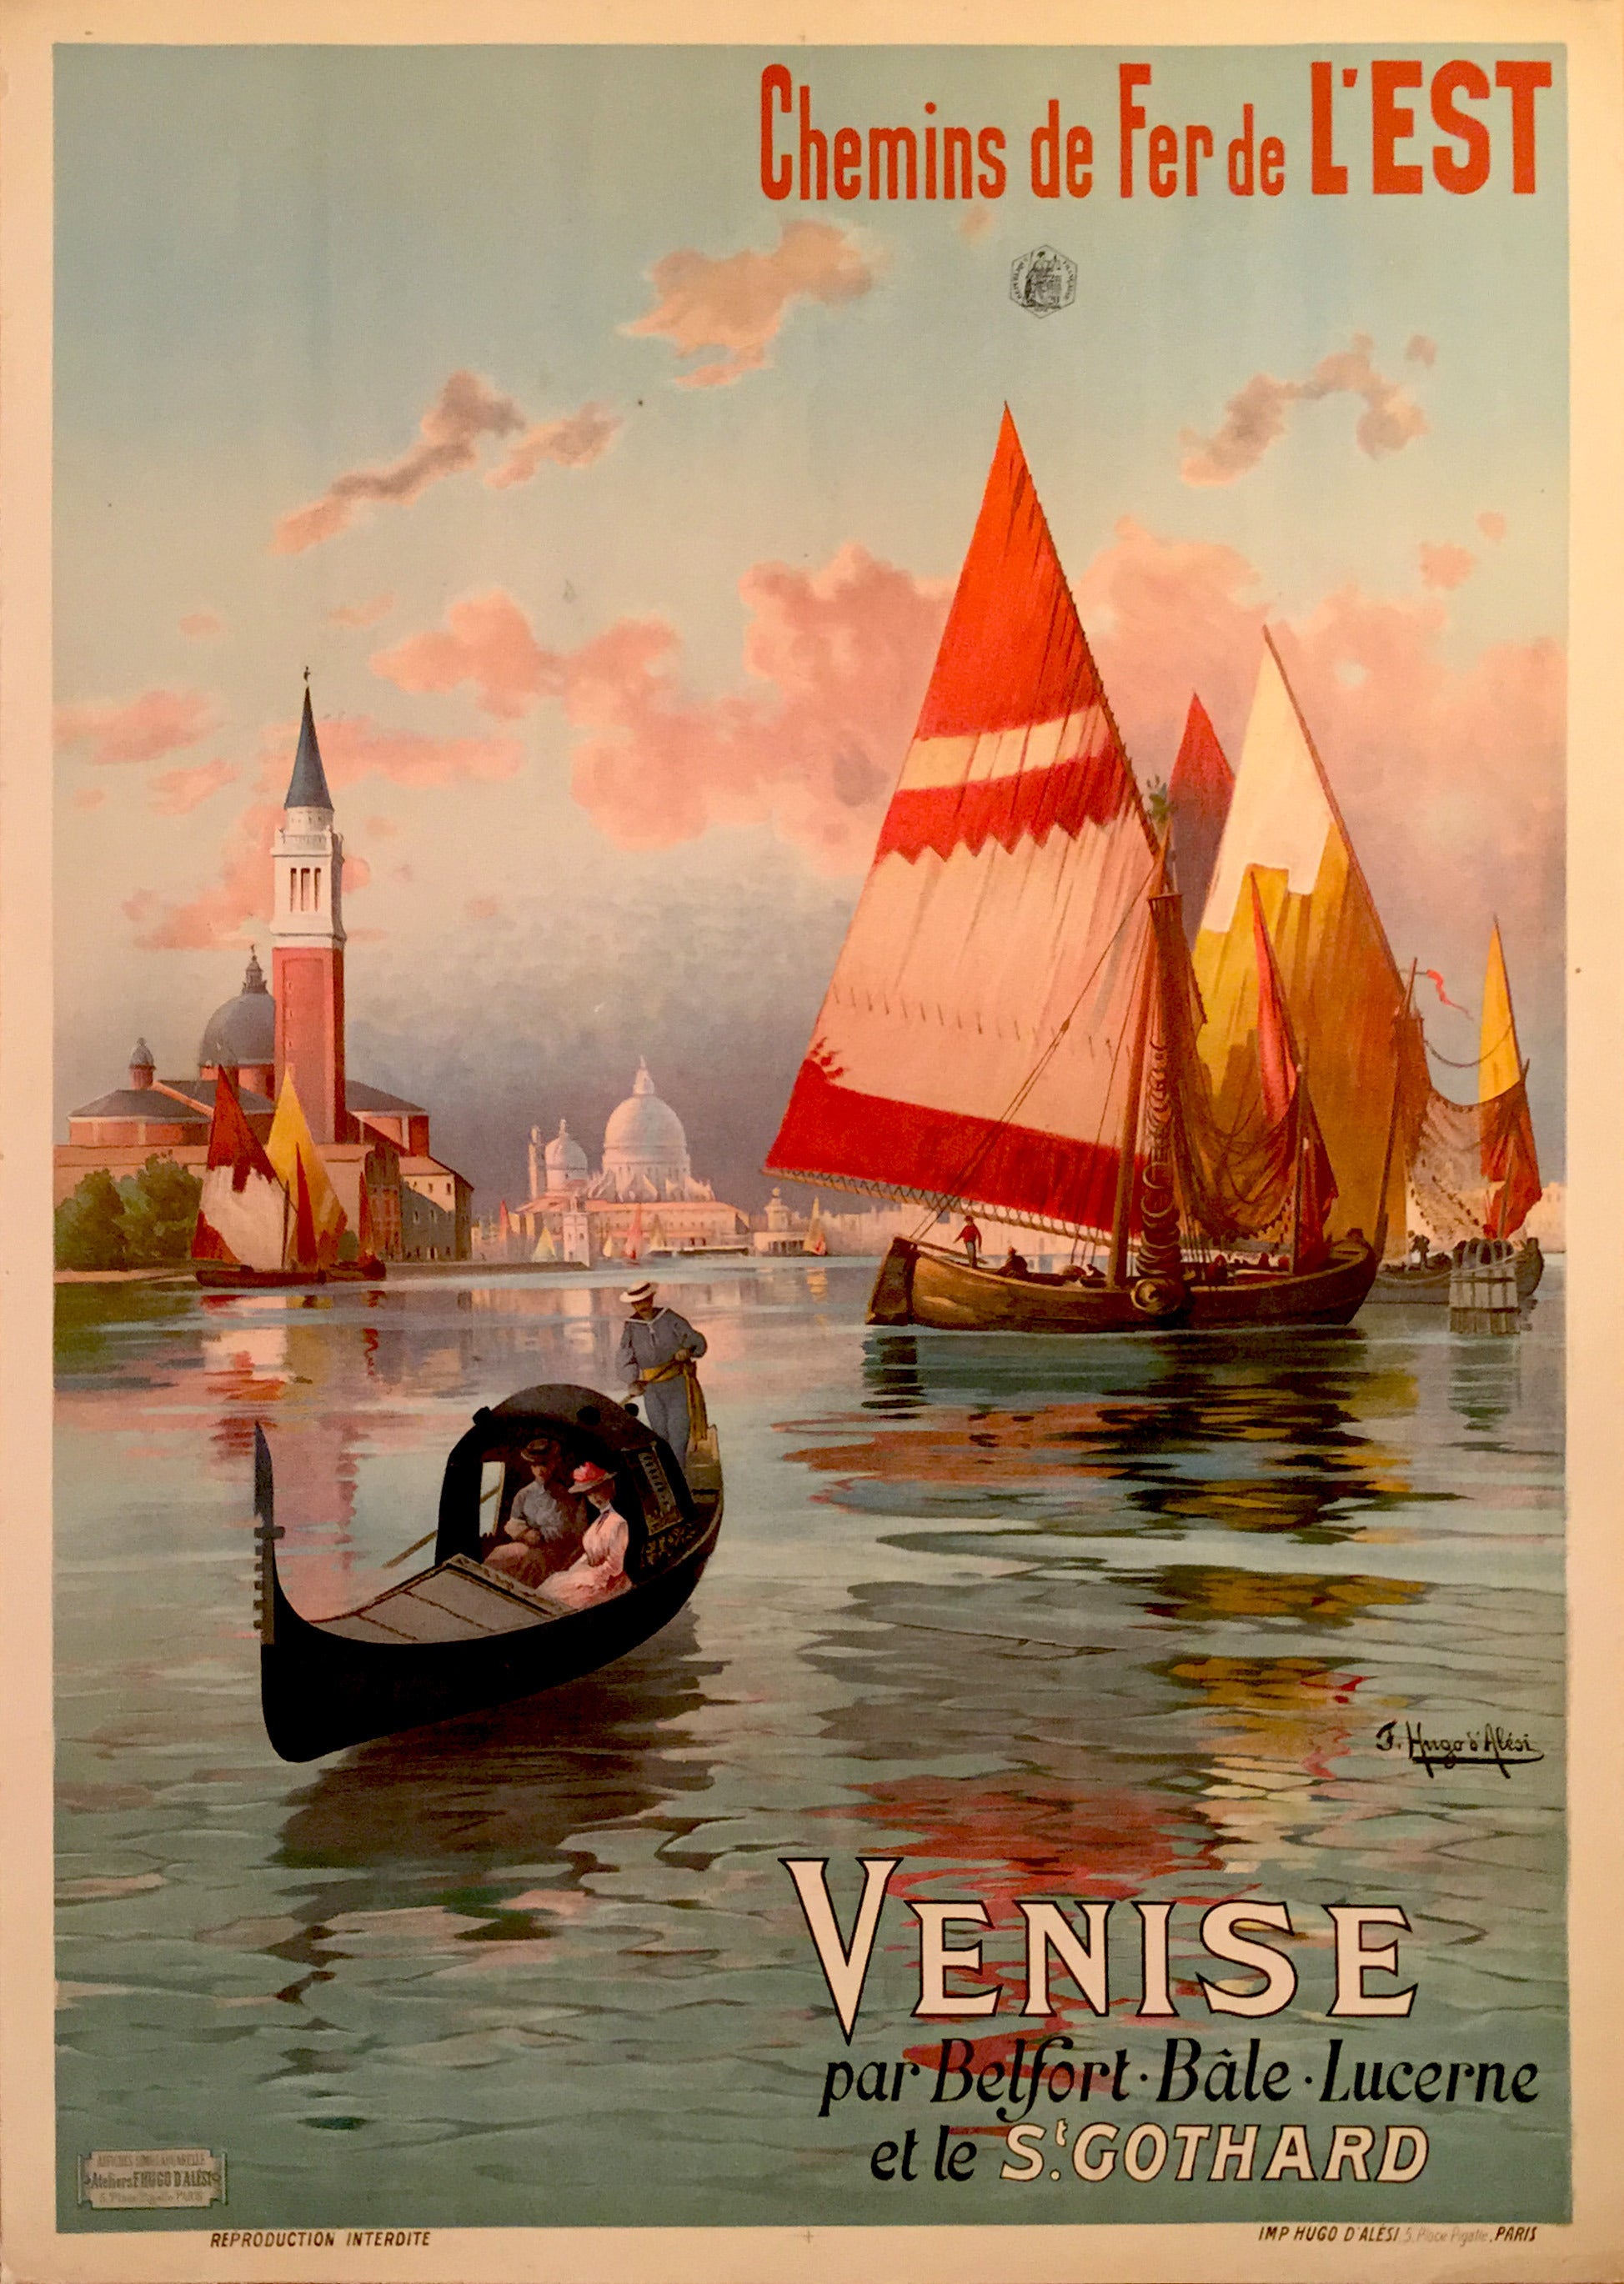 Belle Epoque Period French Travel Poster for Venise by Hugo D’alesi